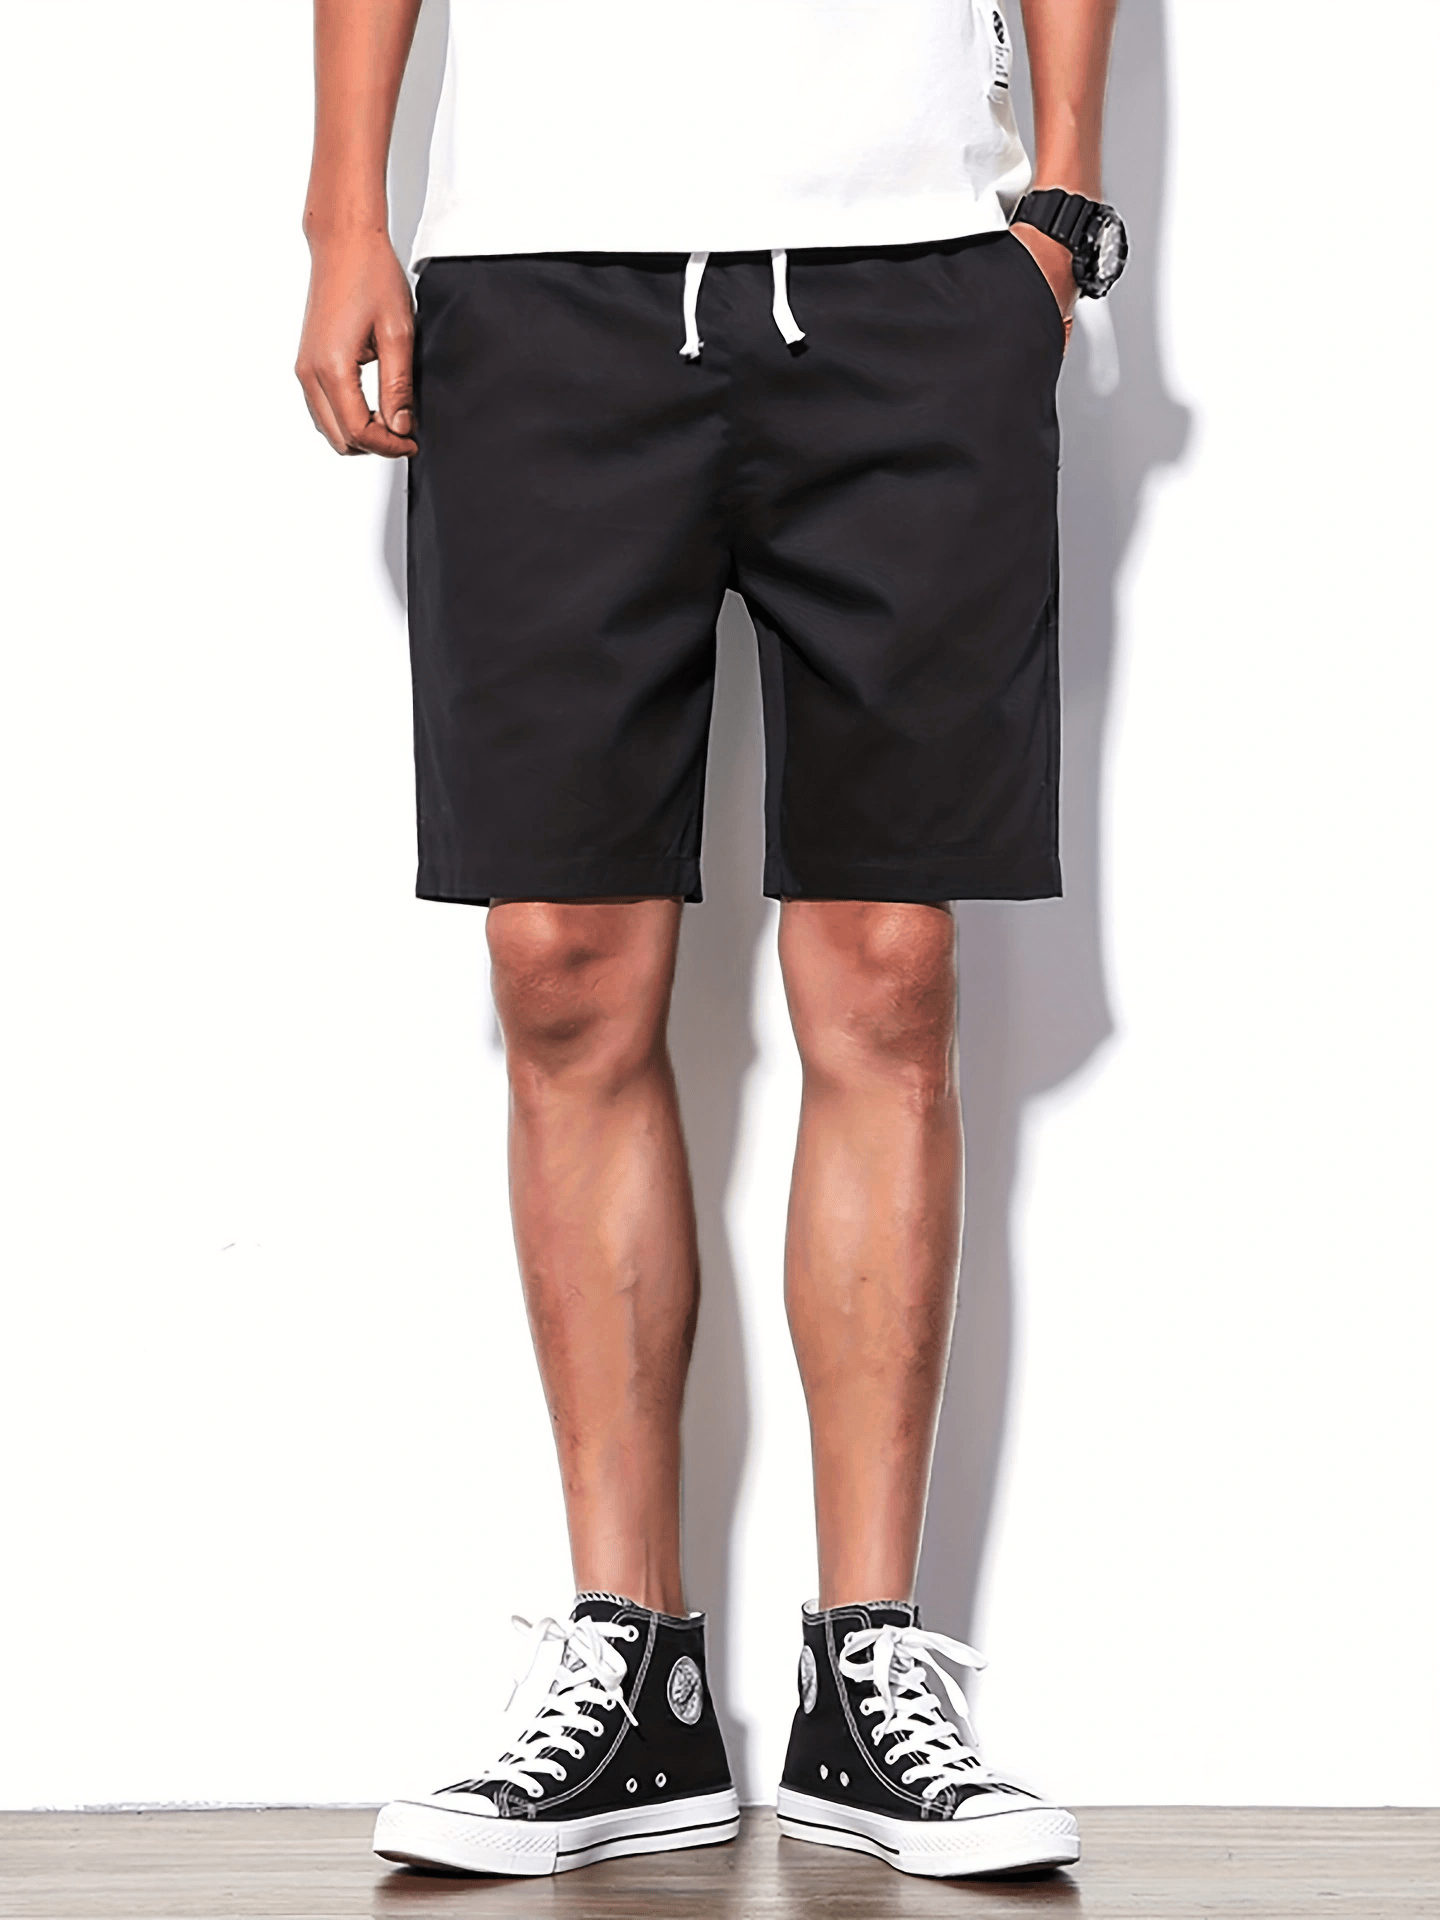 With pockets on either side, get Prisma's men #bermudas with a